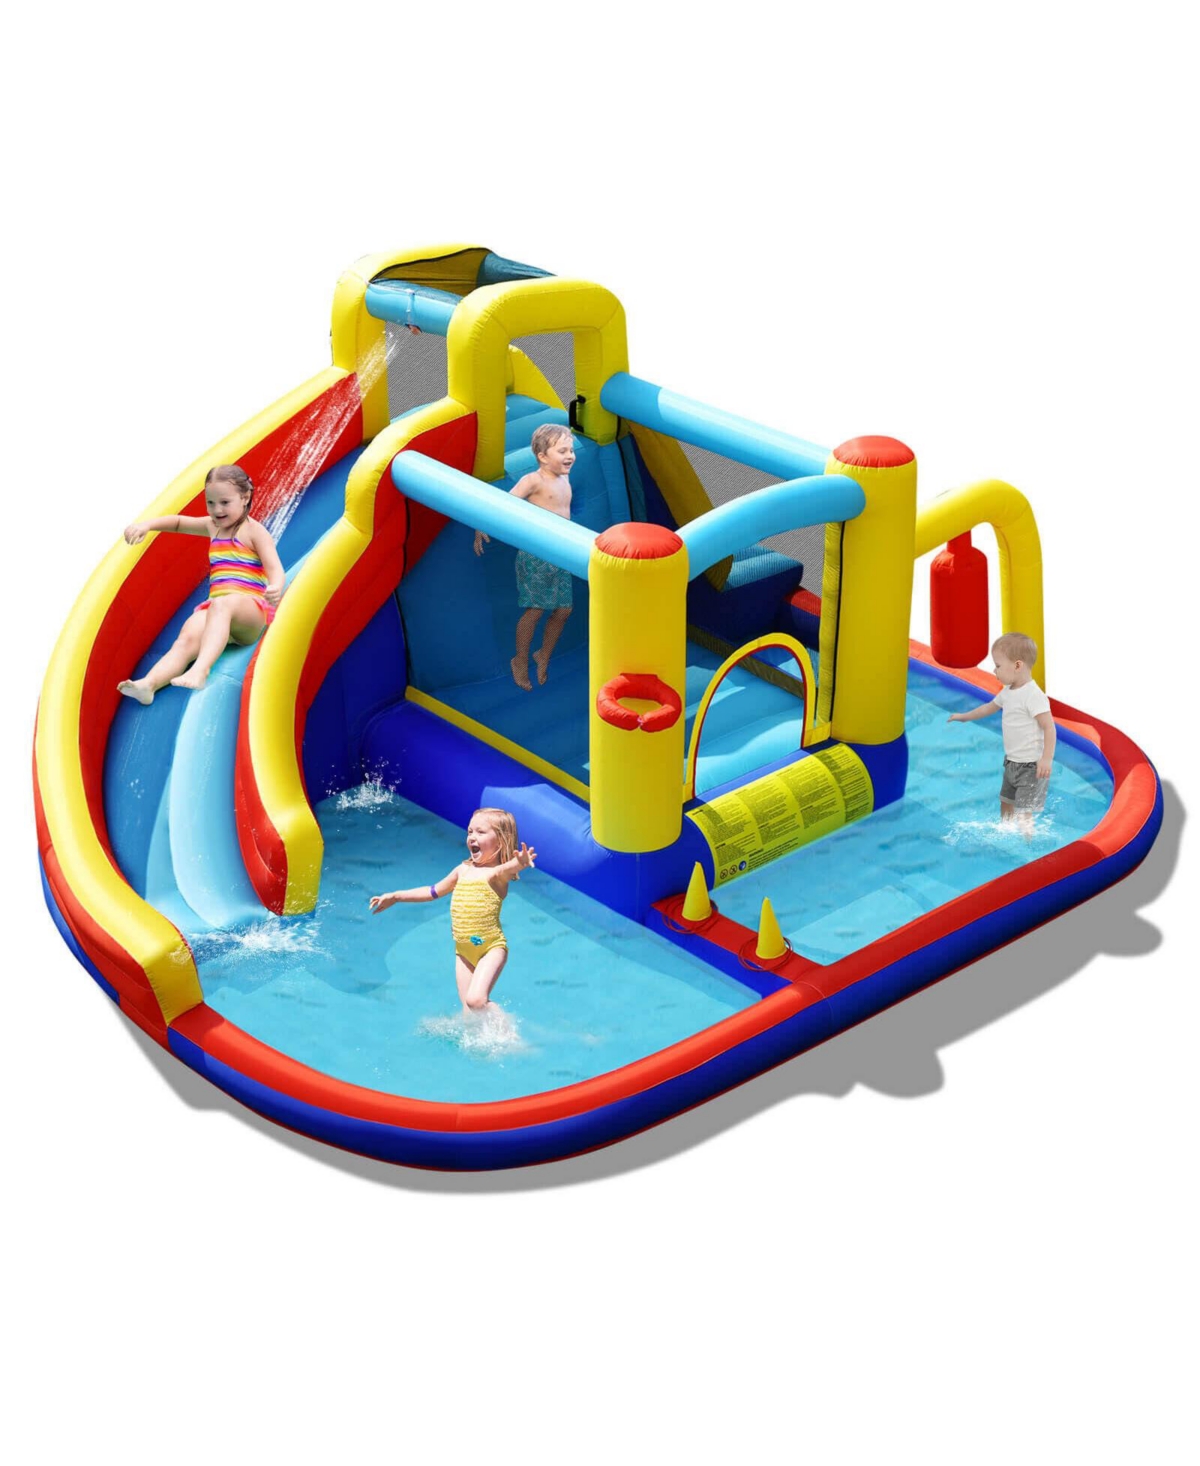 7-in-1 Inflatable Water Slide Bounce Castle with Splash Pool and Climbing Wall without Blower - Open Miscellaneous